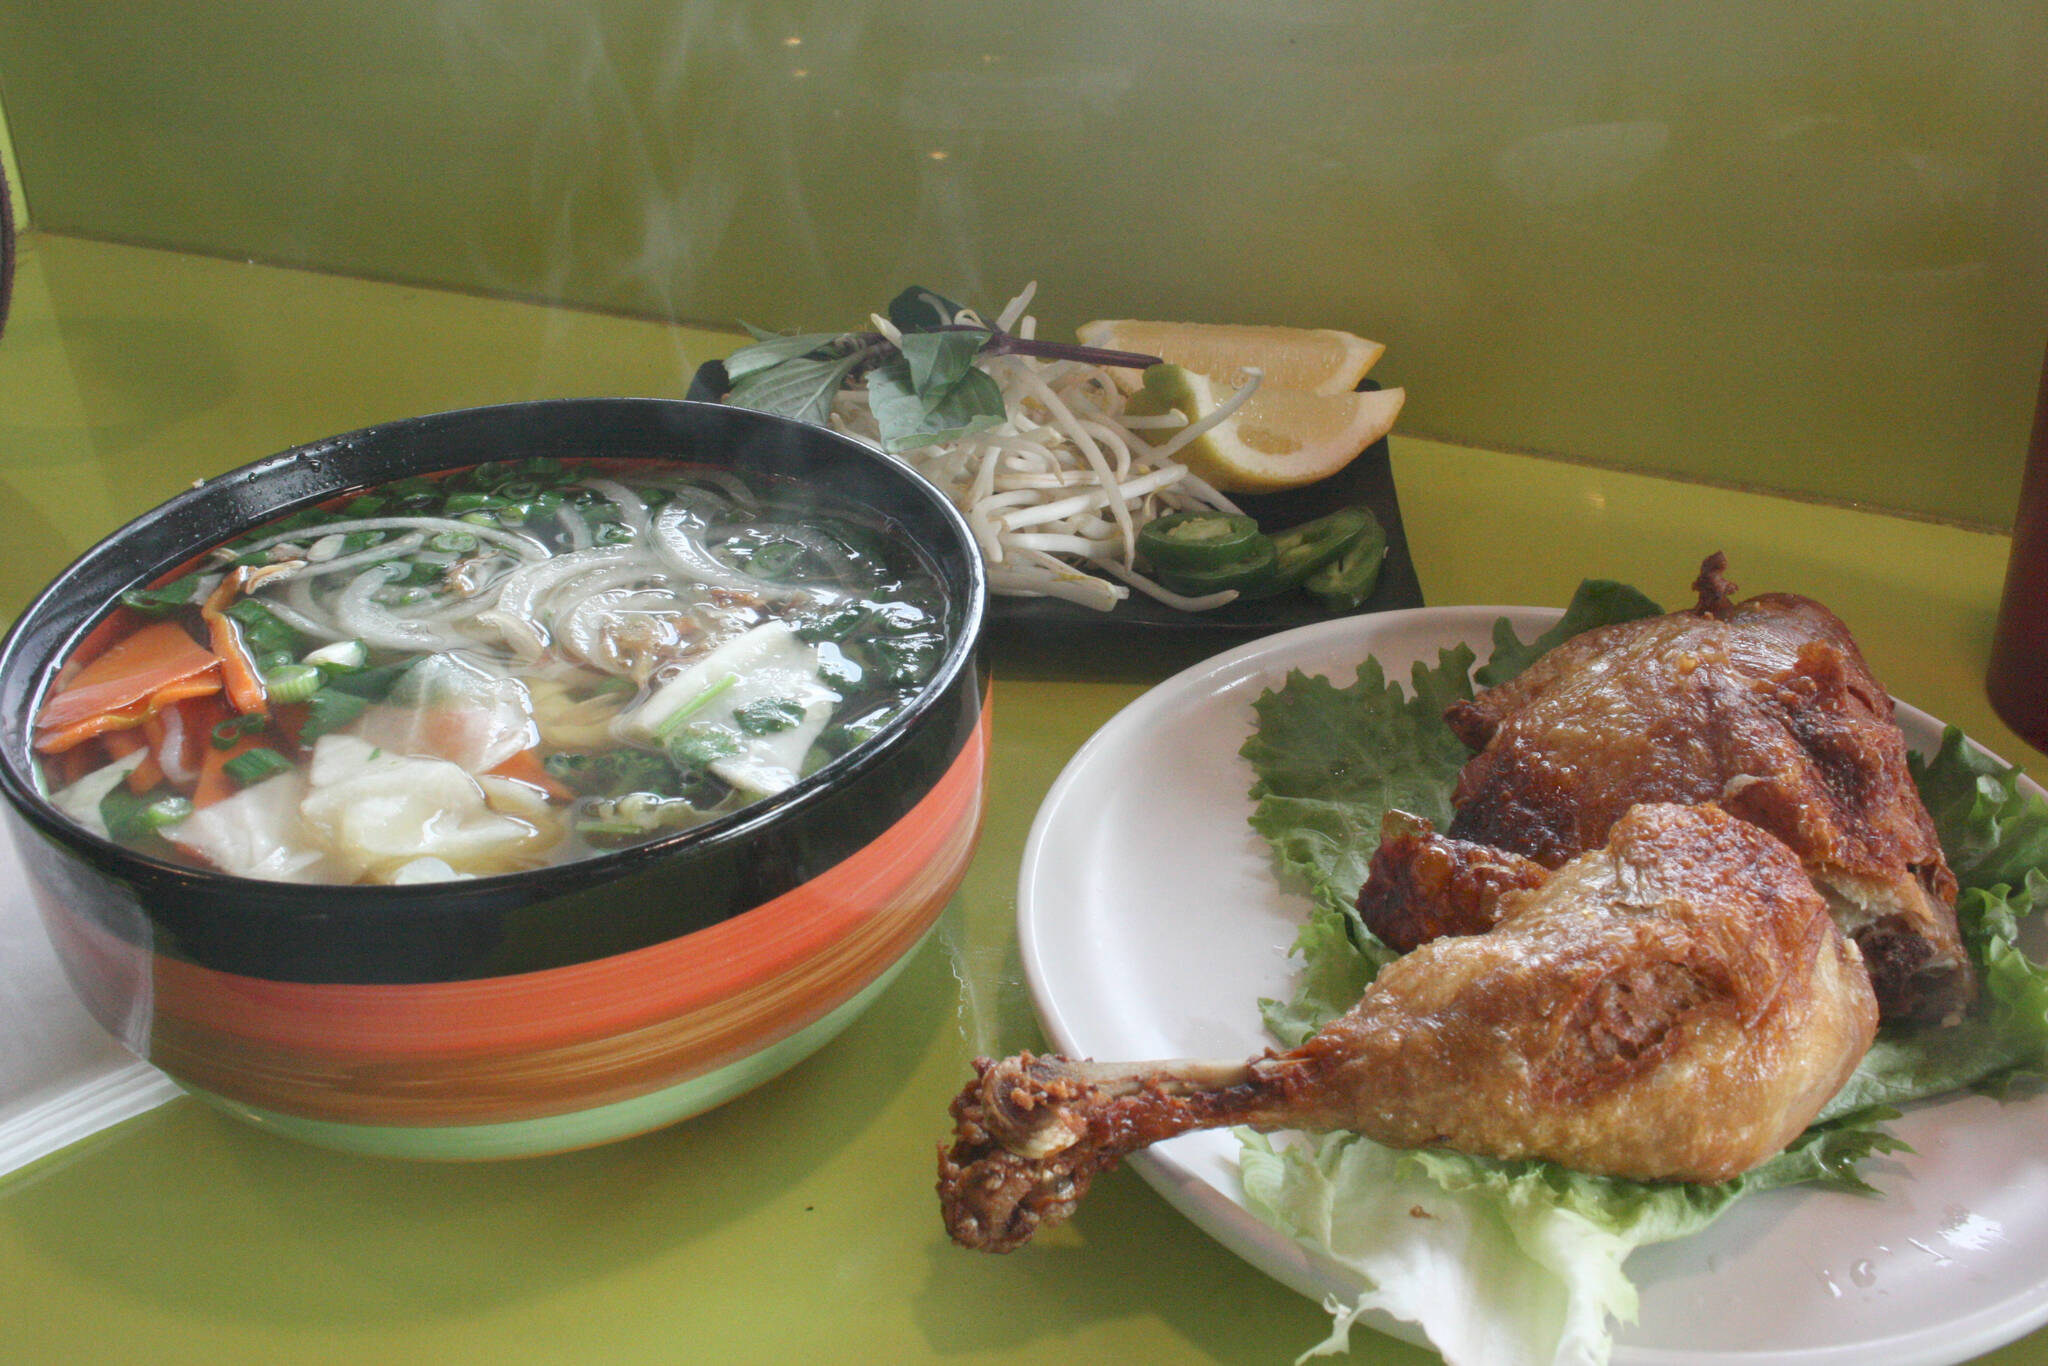 Cameron Sheppard/Sound Publishing
Mi Egg Noodle soup served with a roasted chicken